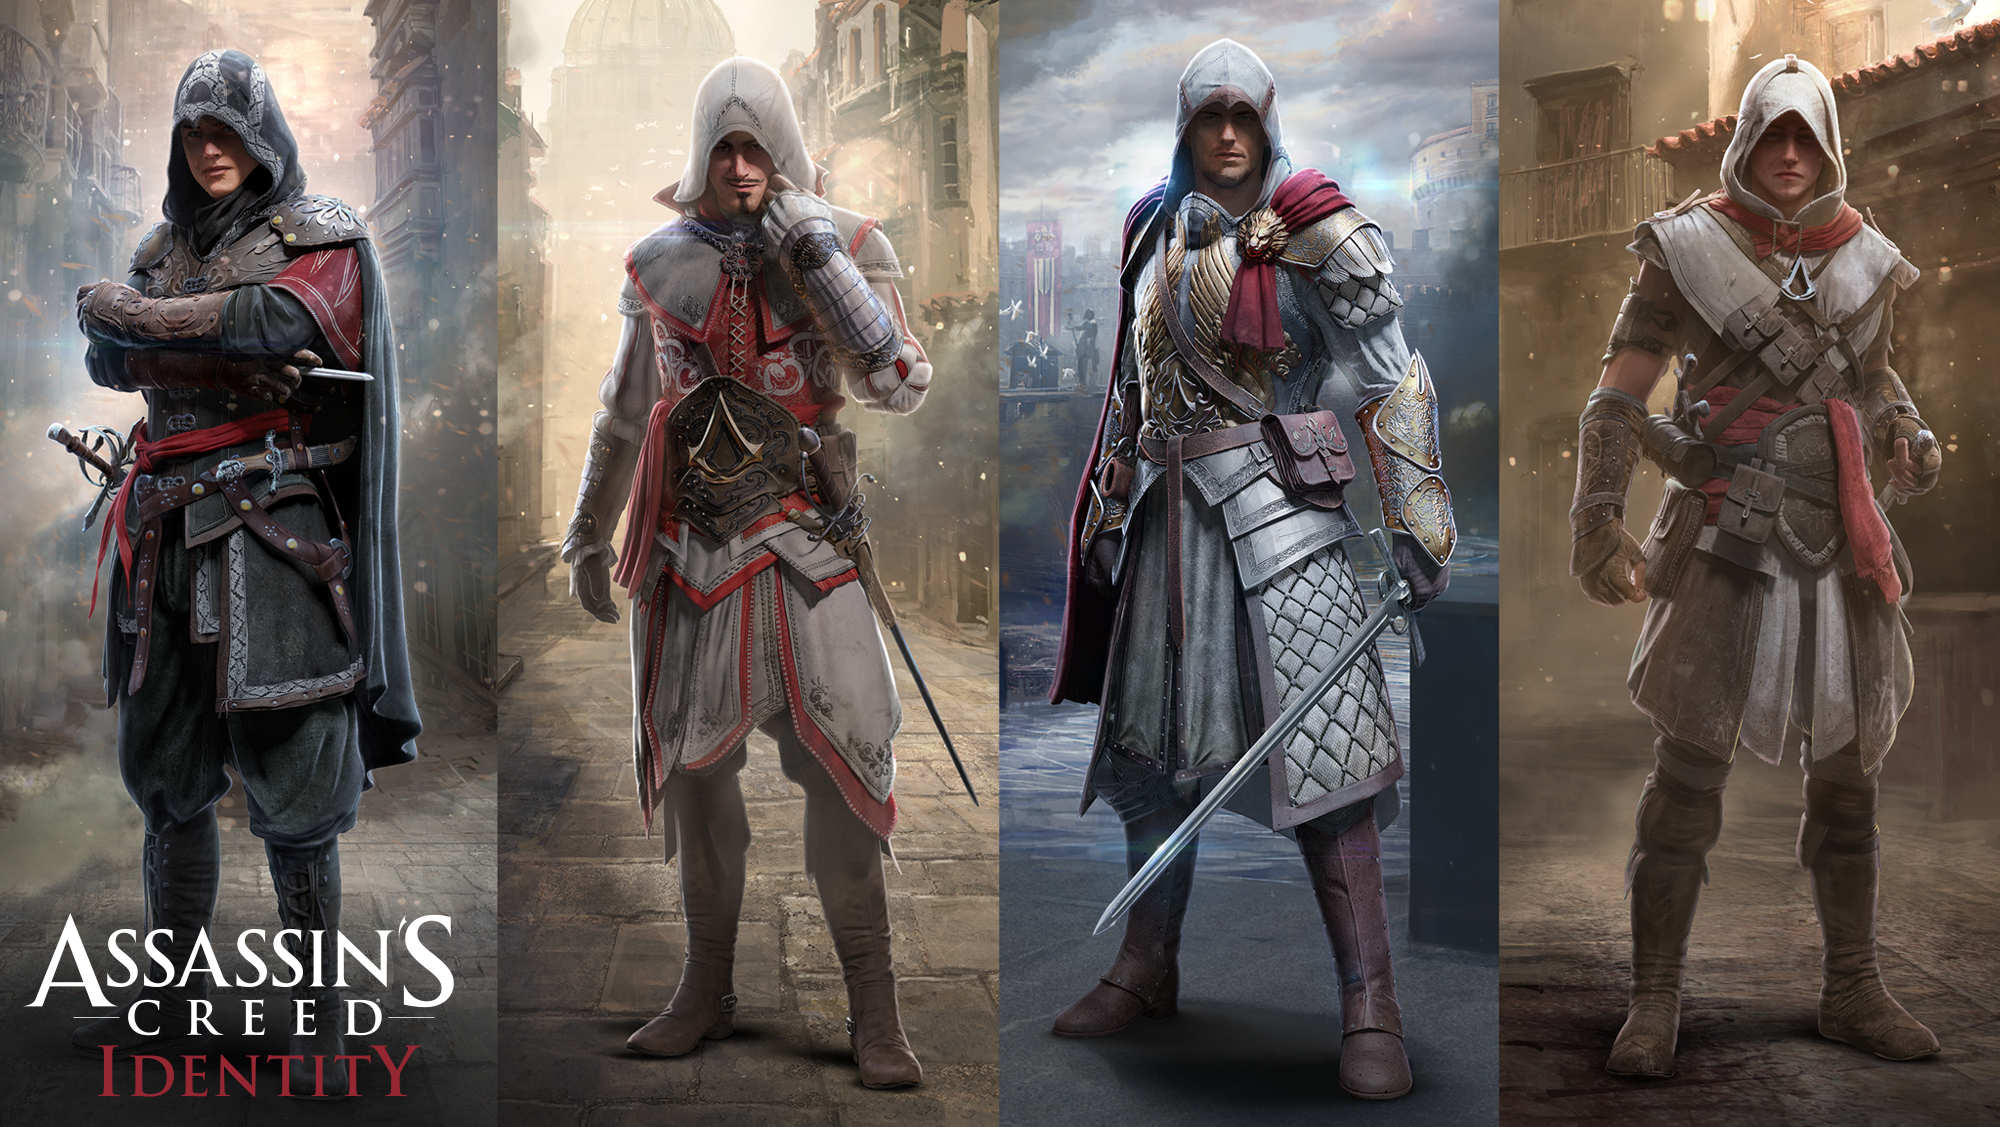 Image for Assassin's Creed Identity announced for iOS